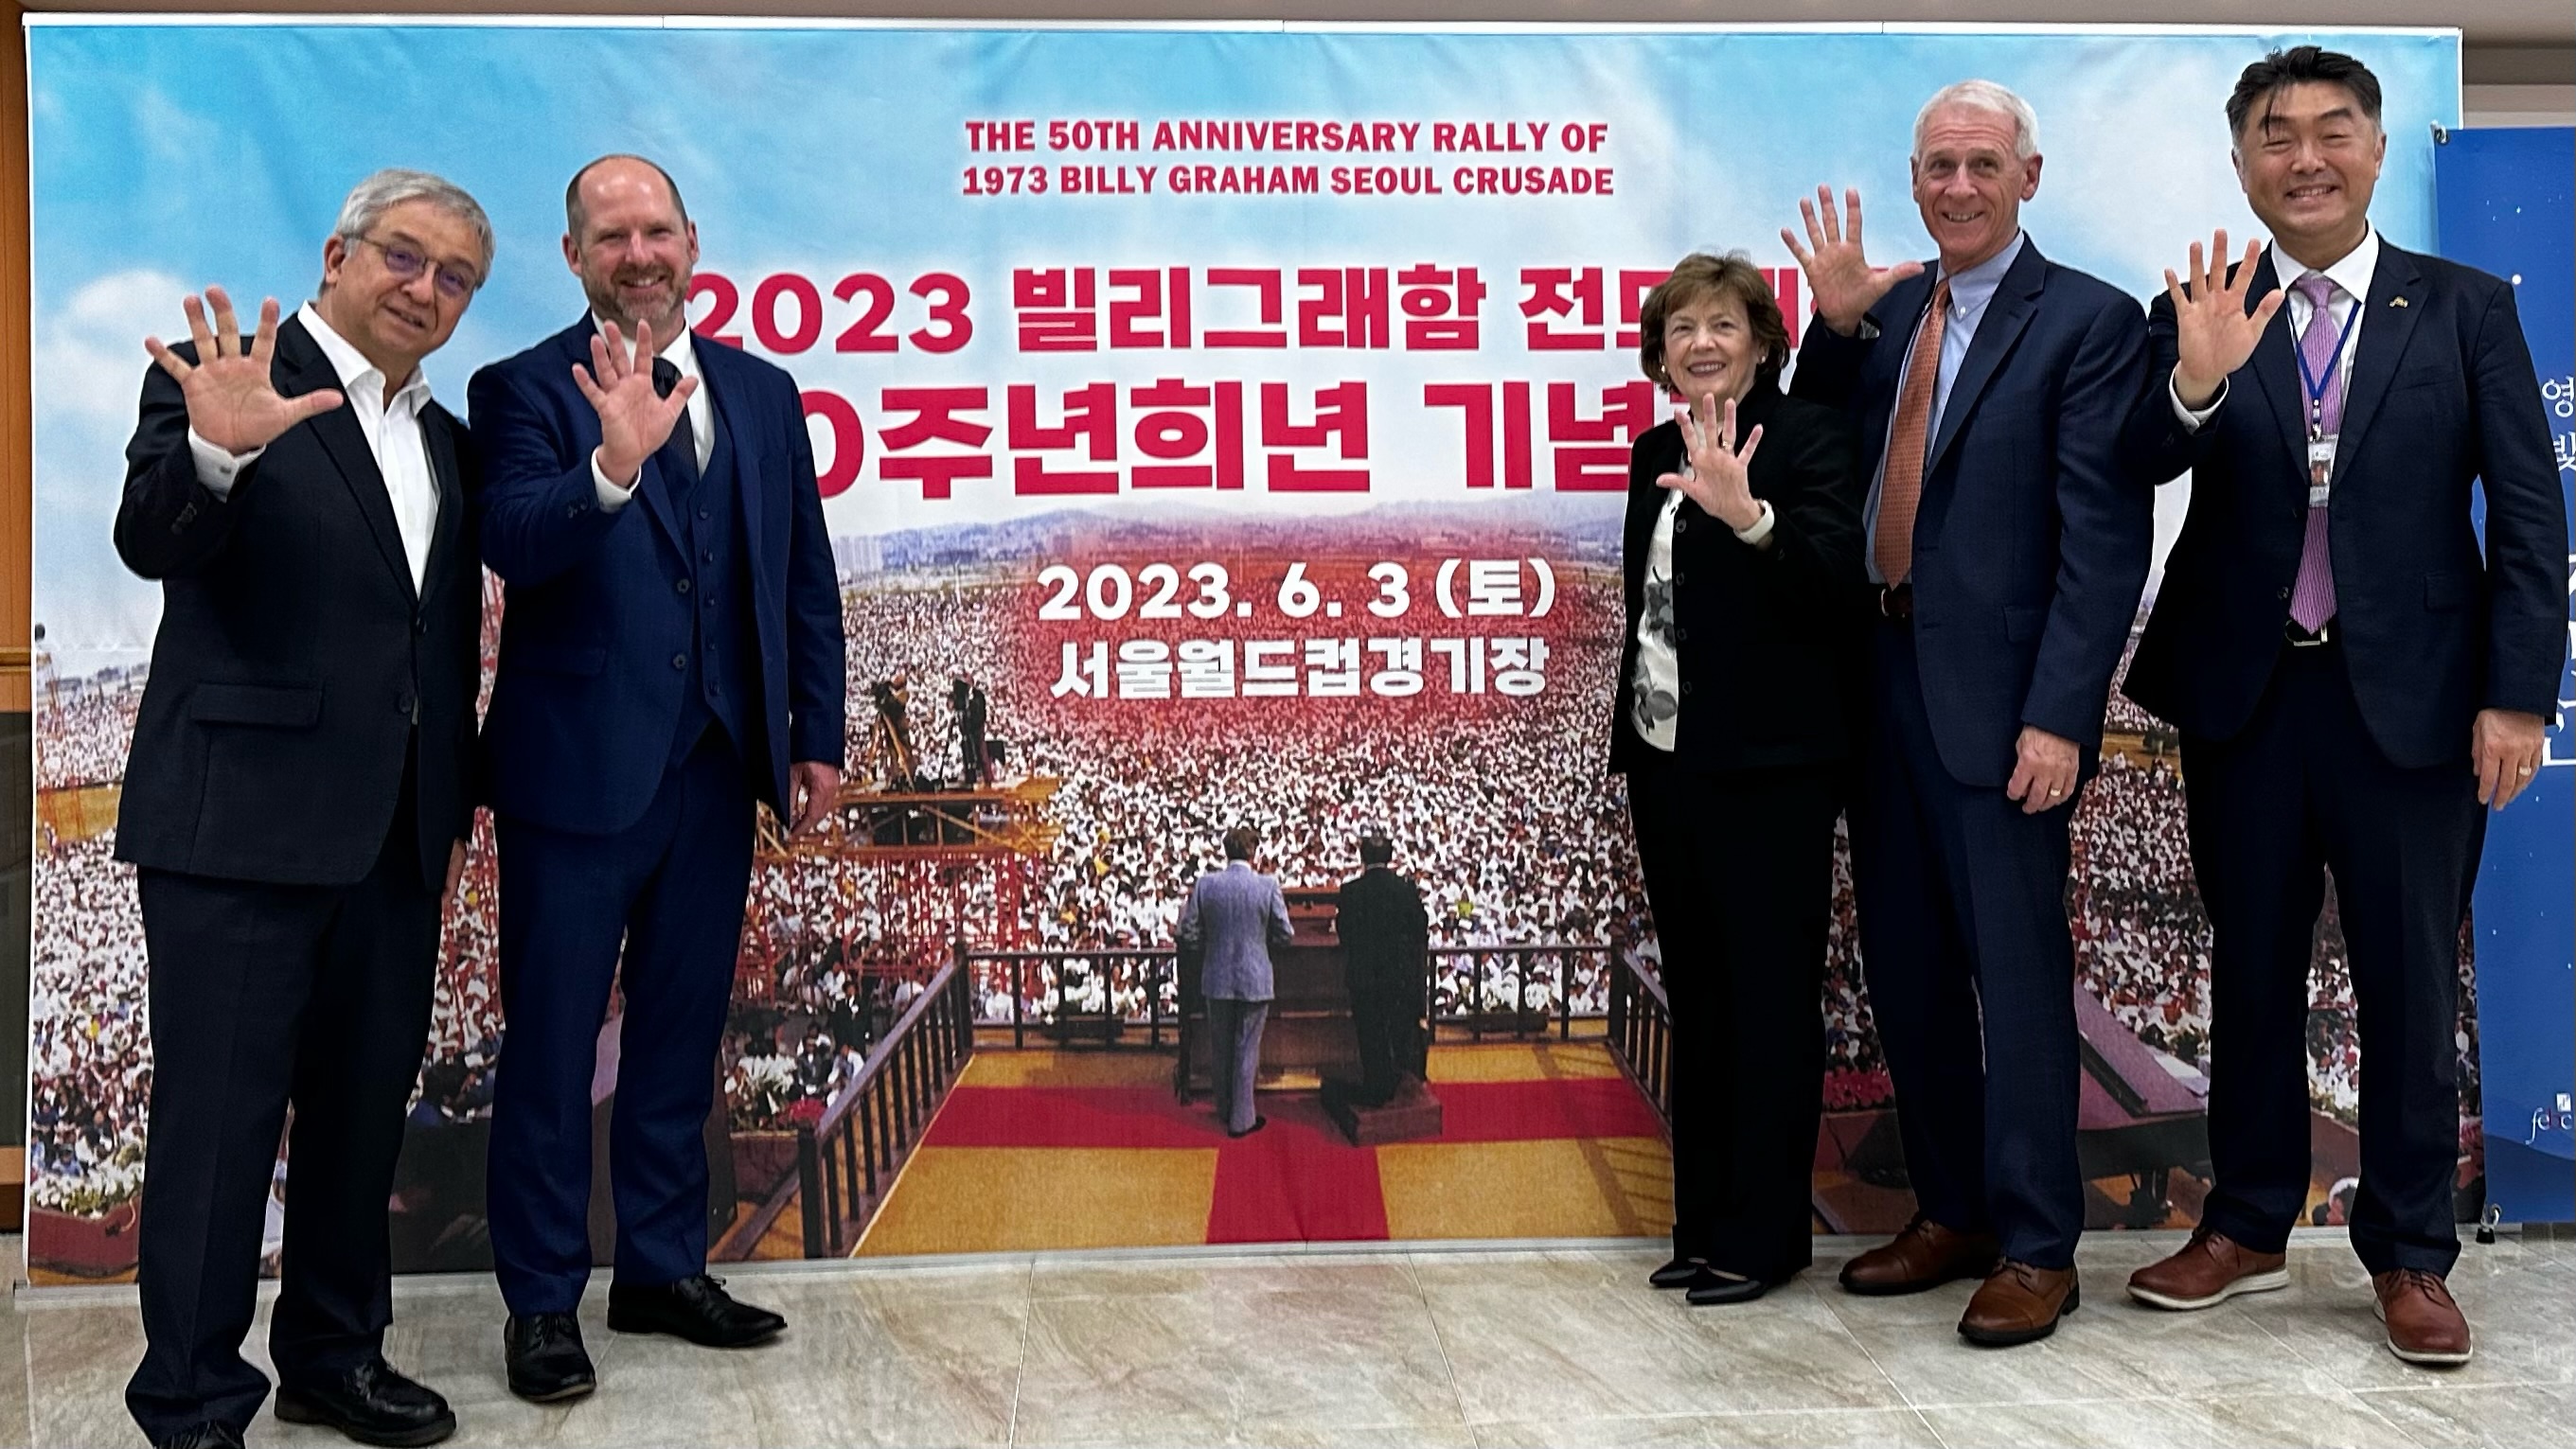 50th Anniv. in June 2023 of Billy Graham Crusade in Seoul, South Korea with FEBC